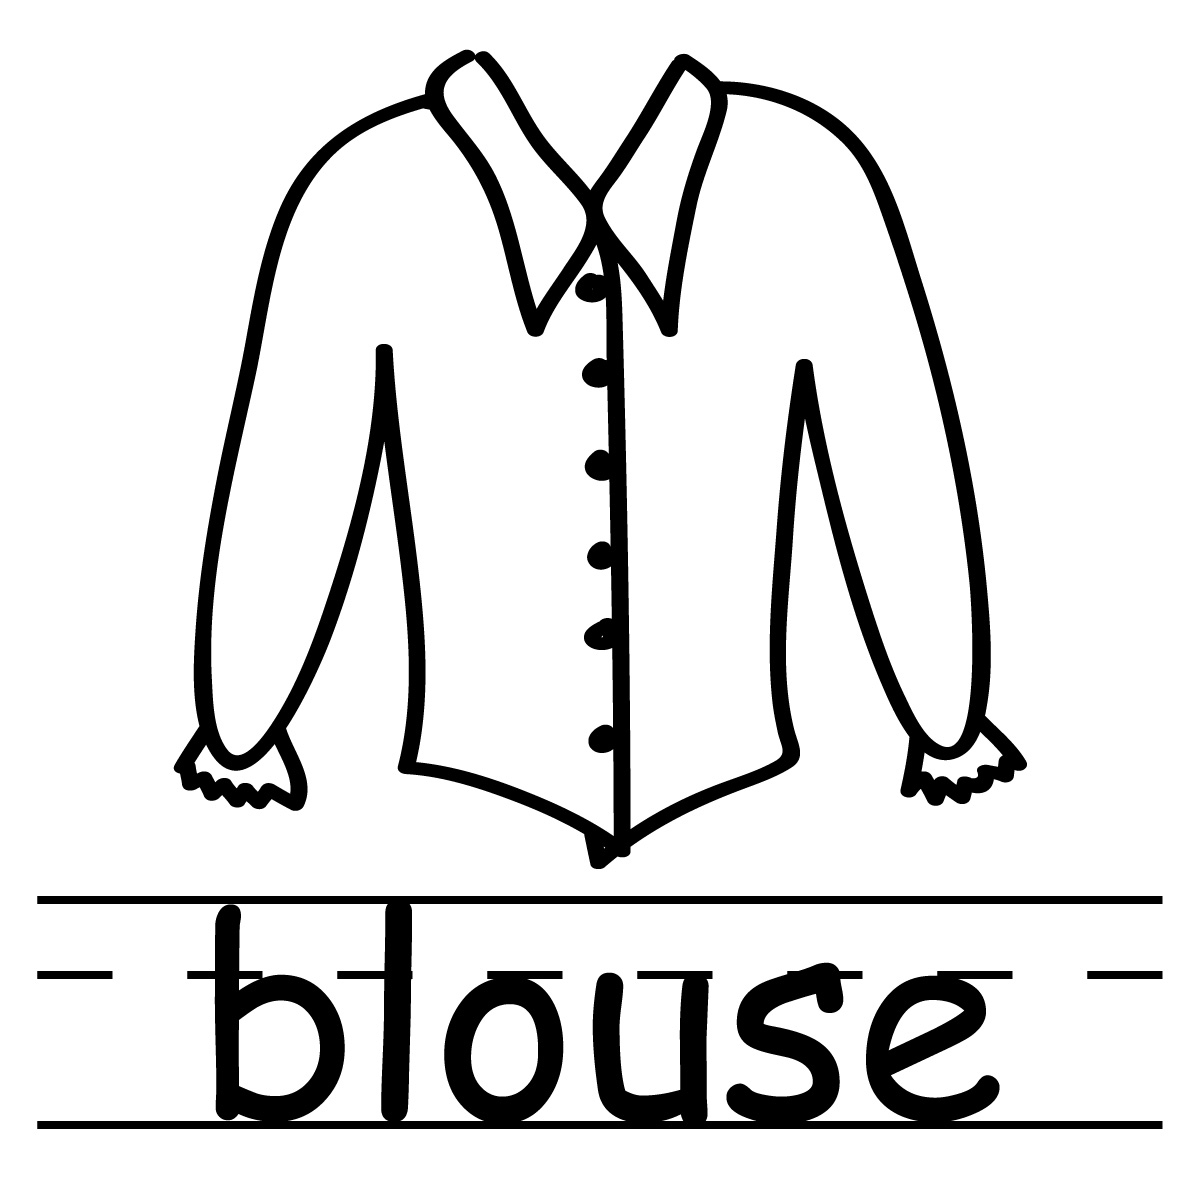 School Clothes Clipart Black And White | Clipart Panda - Free ...